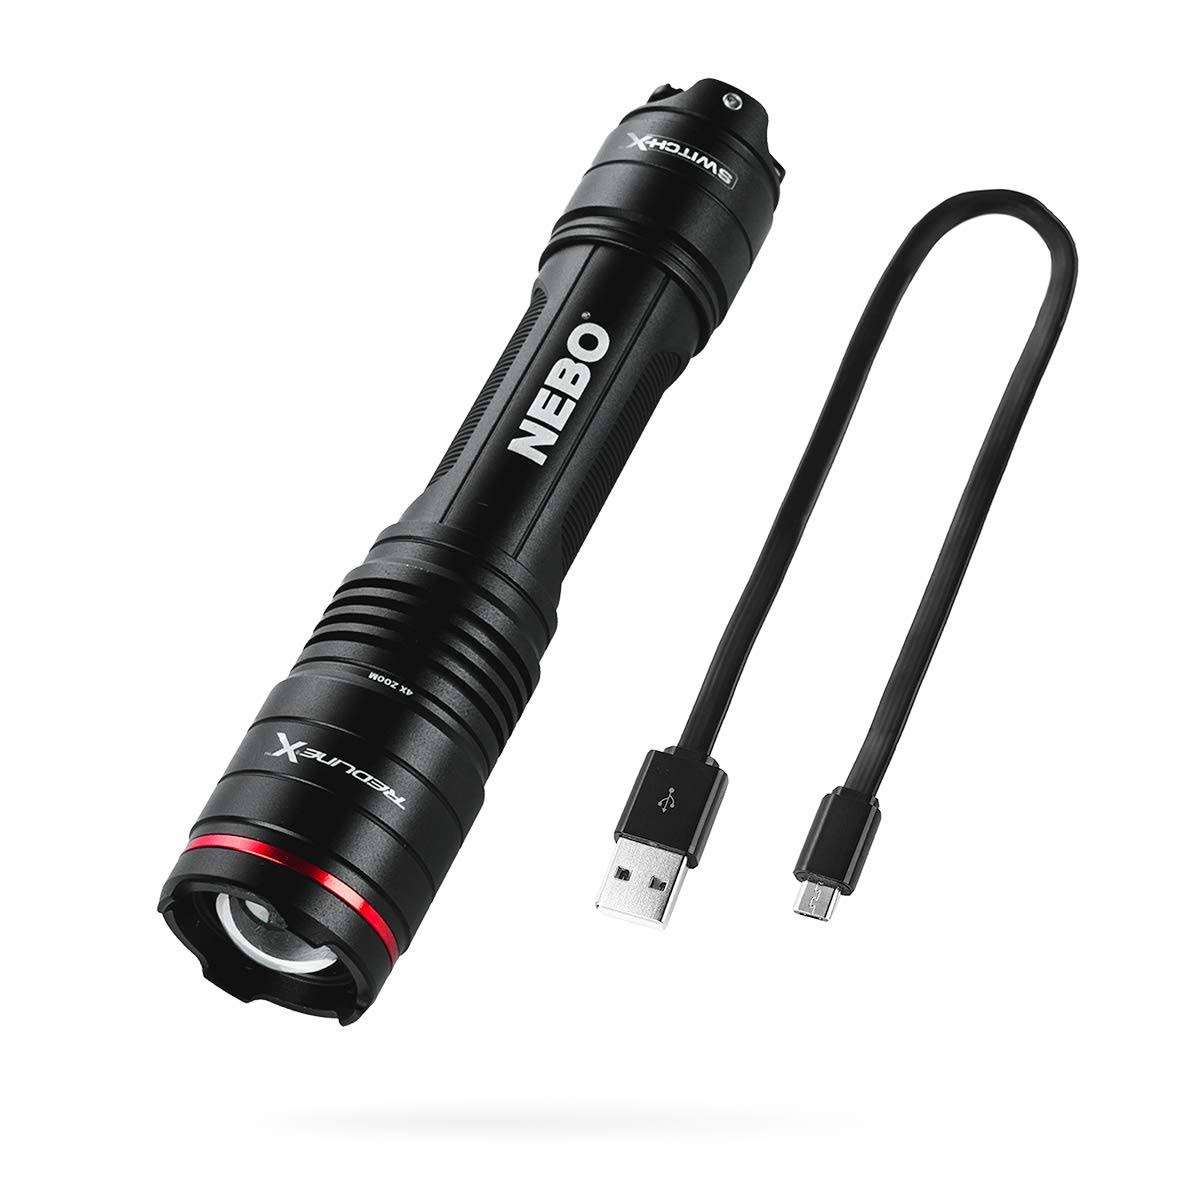 Nebo Redline-X Rechargeable Waterproof Flashlight: 1800 Lumen, 4x Zoom, Switch-X Technology; Patented Paddle Switching Mechanism to Operate The Power